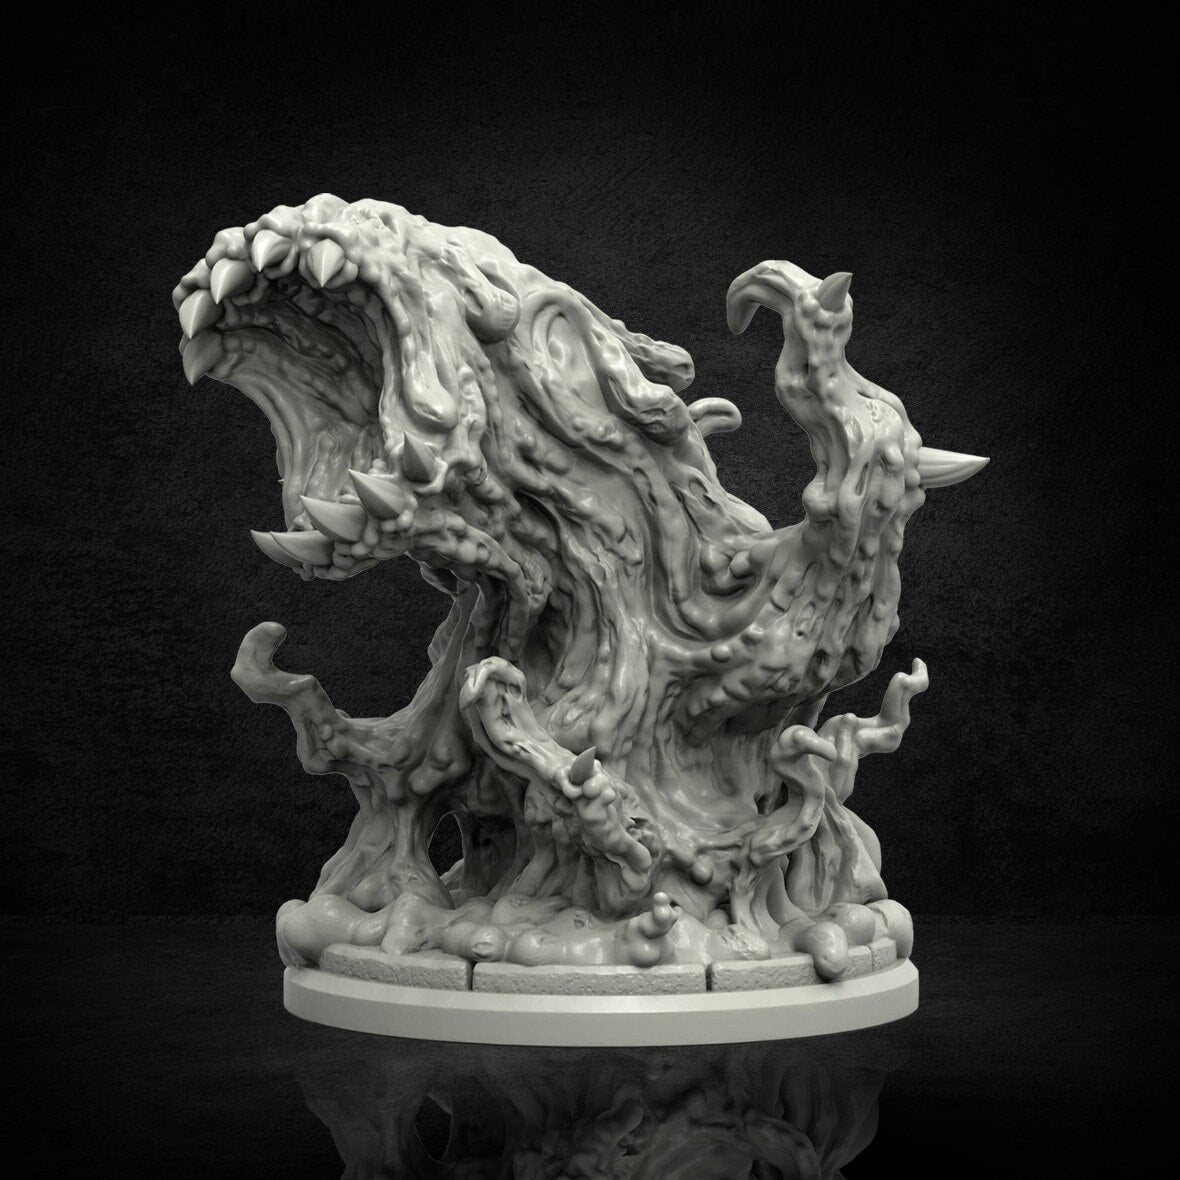 Formless Spawn Miniature - Adaevy Creations - 28mm / 32mm / 36mm